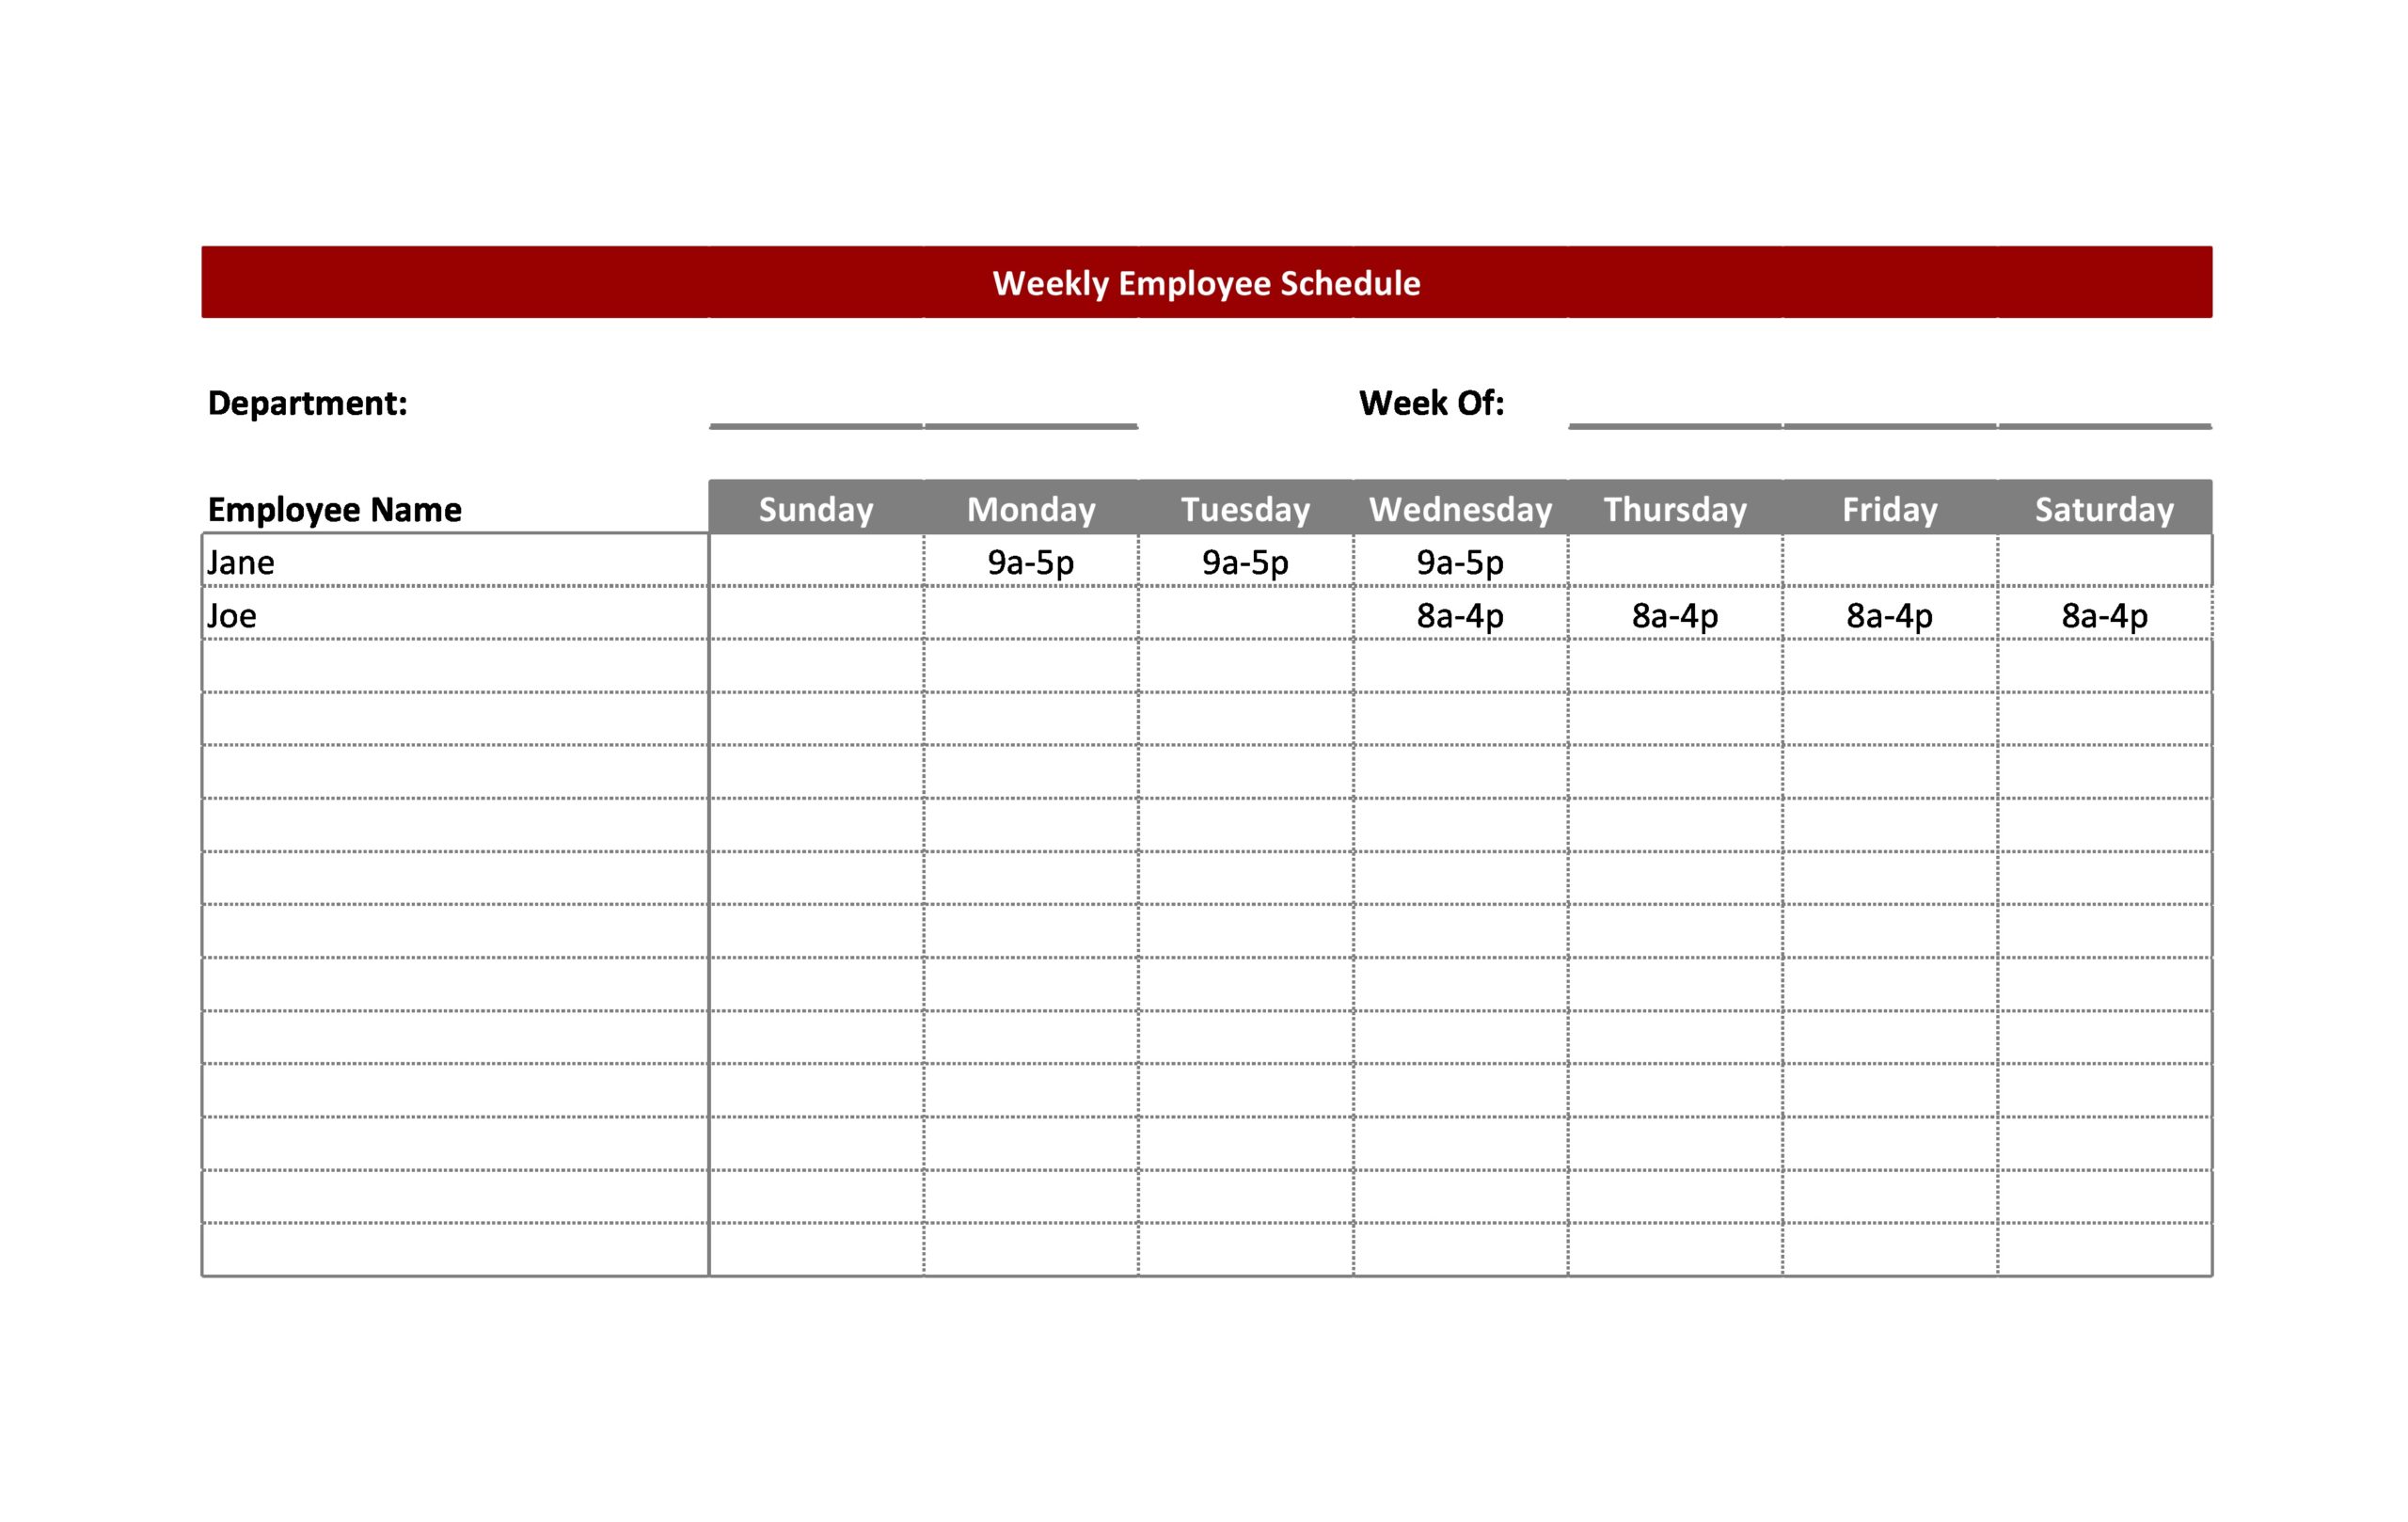 40 Free Employee Schedule Templates (Excel Word) ᐅ TemplateLab